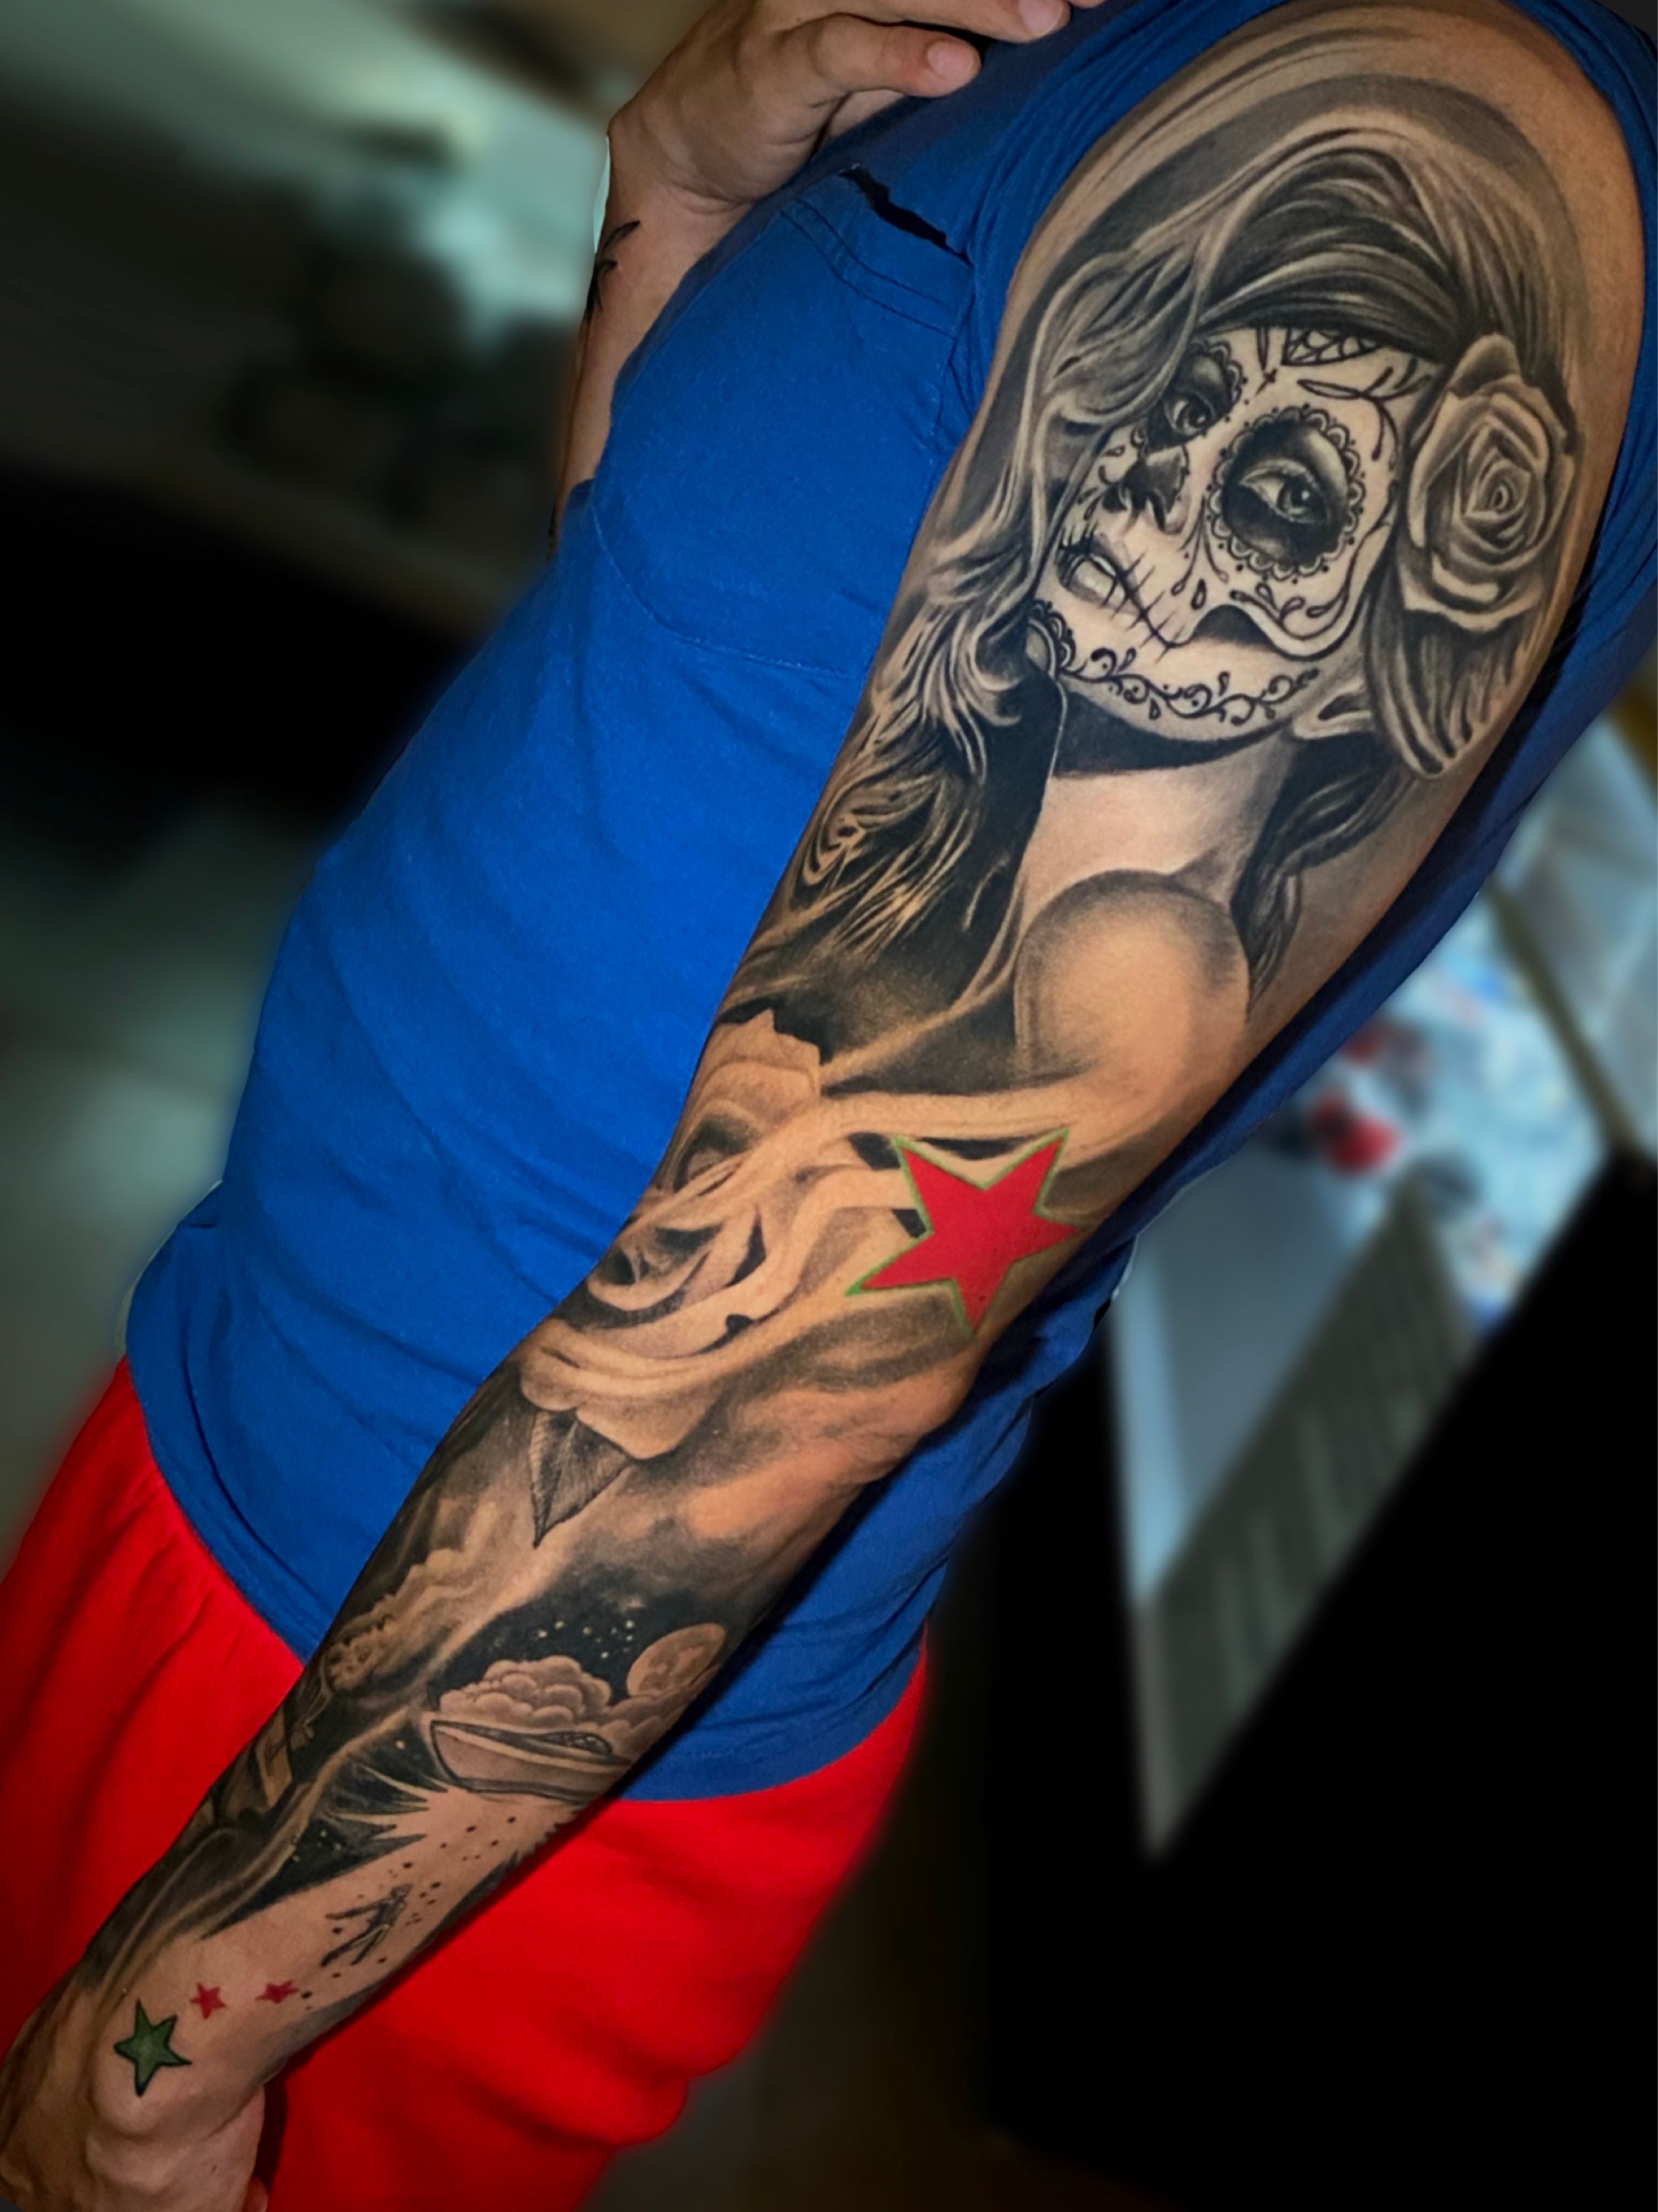 Patrick Tattoo Artist of Orange County Tattoo Studio in the city of  Westminster California — OC Tattoos and Piercings